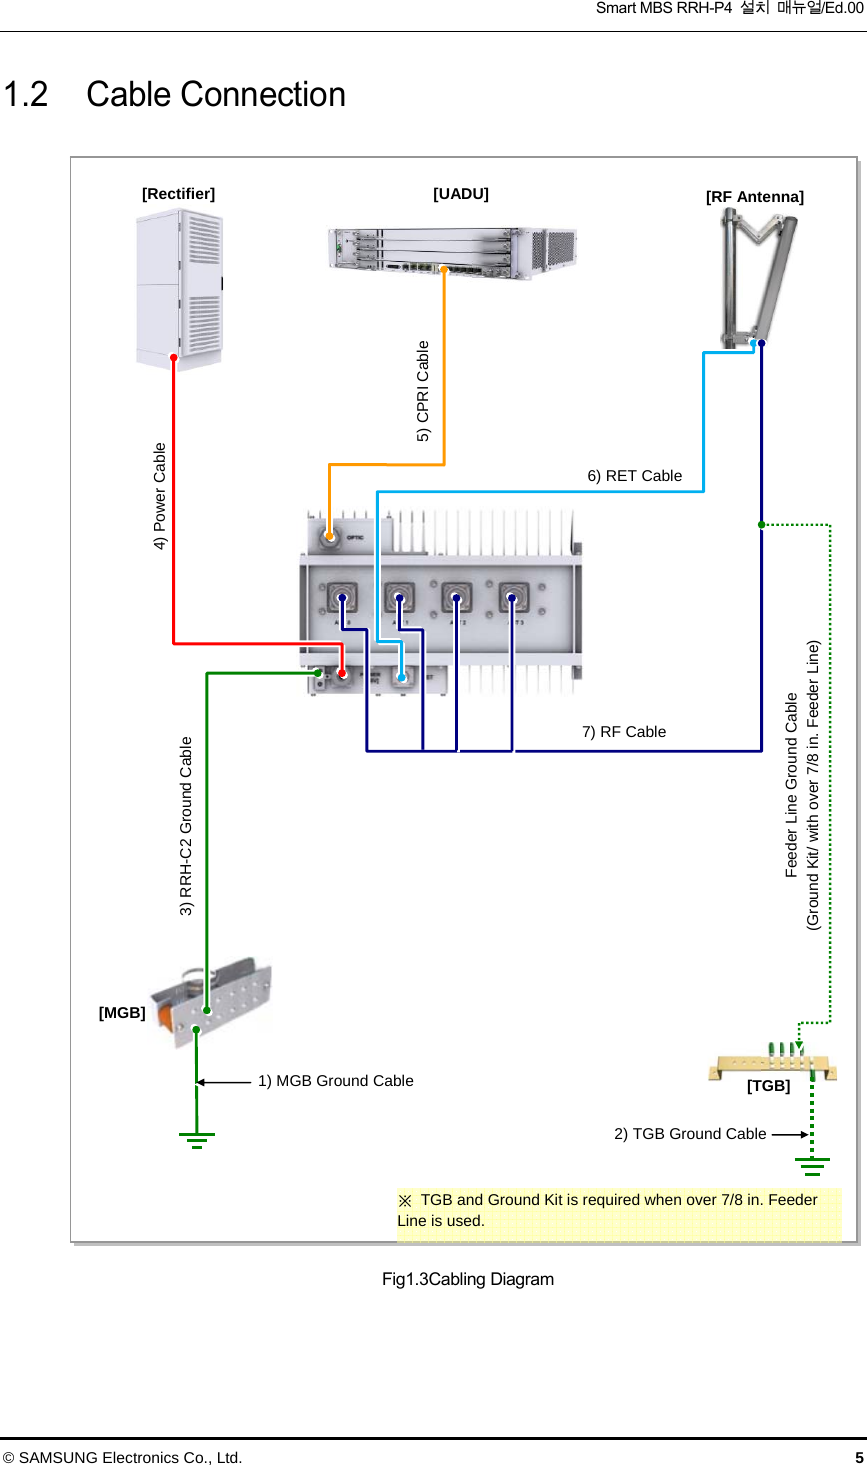  Smart MBS RRH-P4  설치  매뉴얼/Ed.00 © SAMSUNG Electronics Co., Ltd.  5 1.2  Cable Connection  Fig1.3Cabling Diagram   3) RRH-C2 Ground Cable [RF Antenna] [MGB] 2) TGB Ground Cable[TGB] Feeder Line Ground Cable (Ground Kit/ with over 7/8 in. Feeder Line) ※  TGB and Ground Kit is required when over 7/8 in. Feeder Line is used. [Rectifier]  [UADU] 4) Power Cable 1) MGB Ground Cable 5) CPRI Cable 6) RET Cable 7) RF Cable 